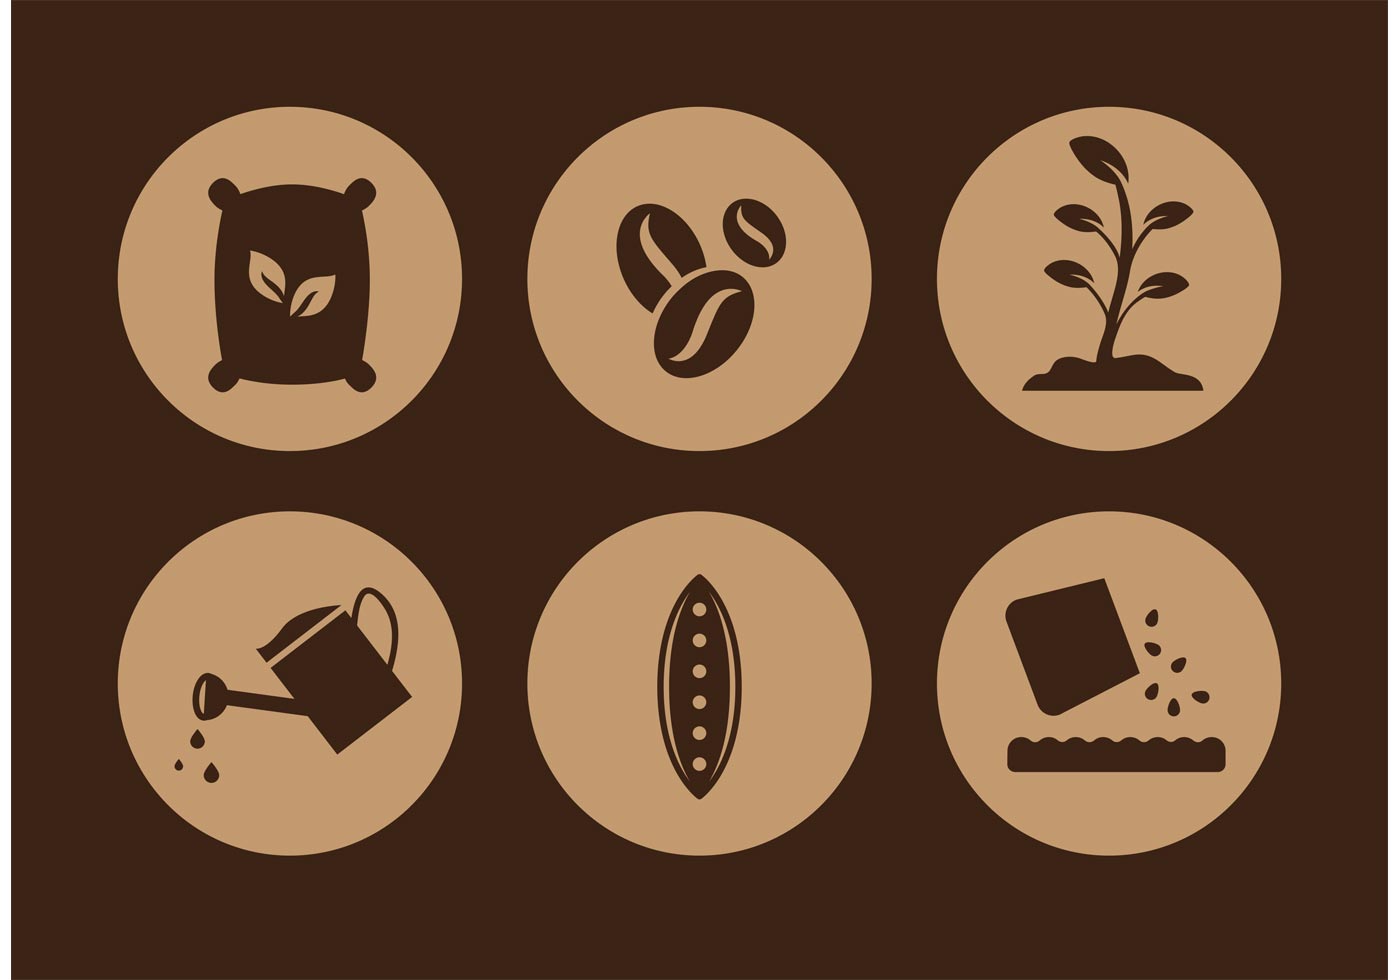 Seed Vector Pack - Download Free Vector Art, Stock ...